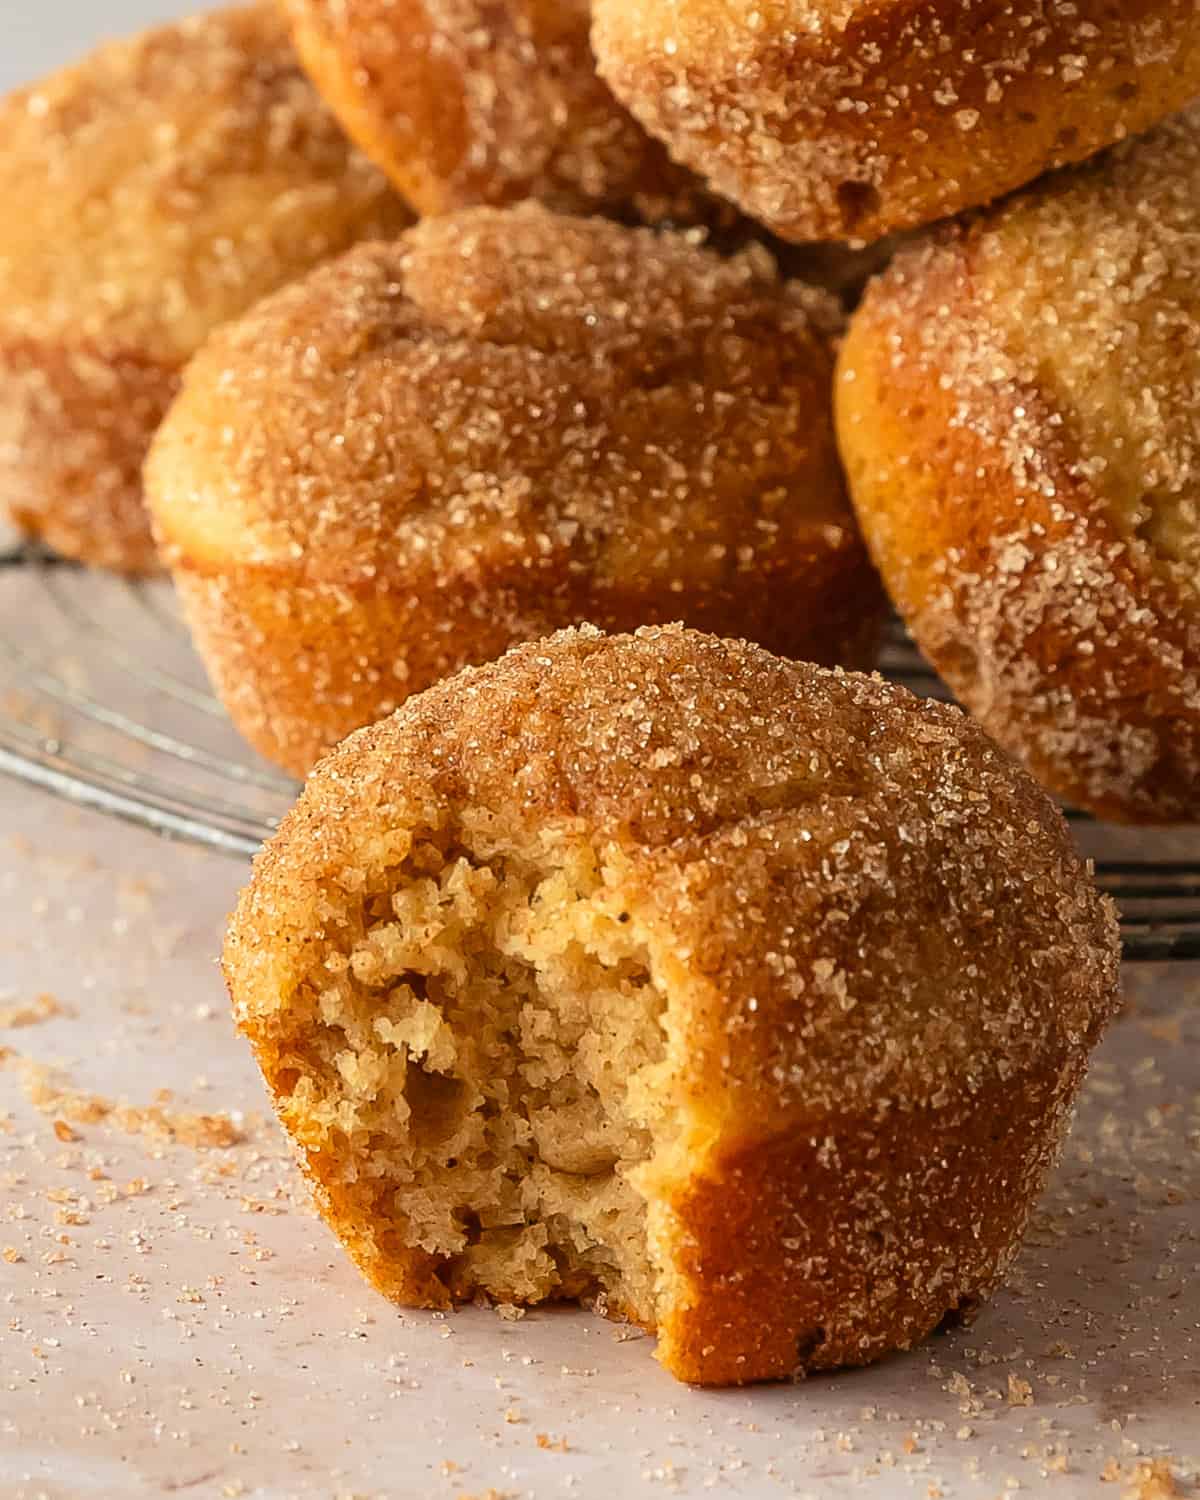 Cinnamon muffins are deliciously soft, moist and fluffy cinnamon spiced vanilla muffins with beautiful domed tops.  Once baked, these delightful breakfast muffins are dipped in melted butter and rolled in cinnamon sugar. They’re quick and easy muffins that are perfect for breakfasts or snacks. 